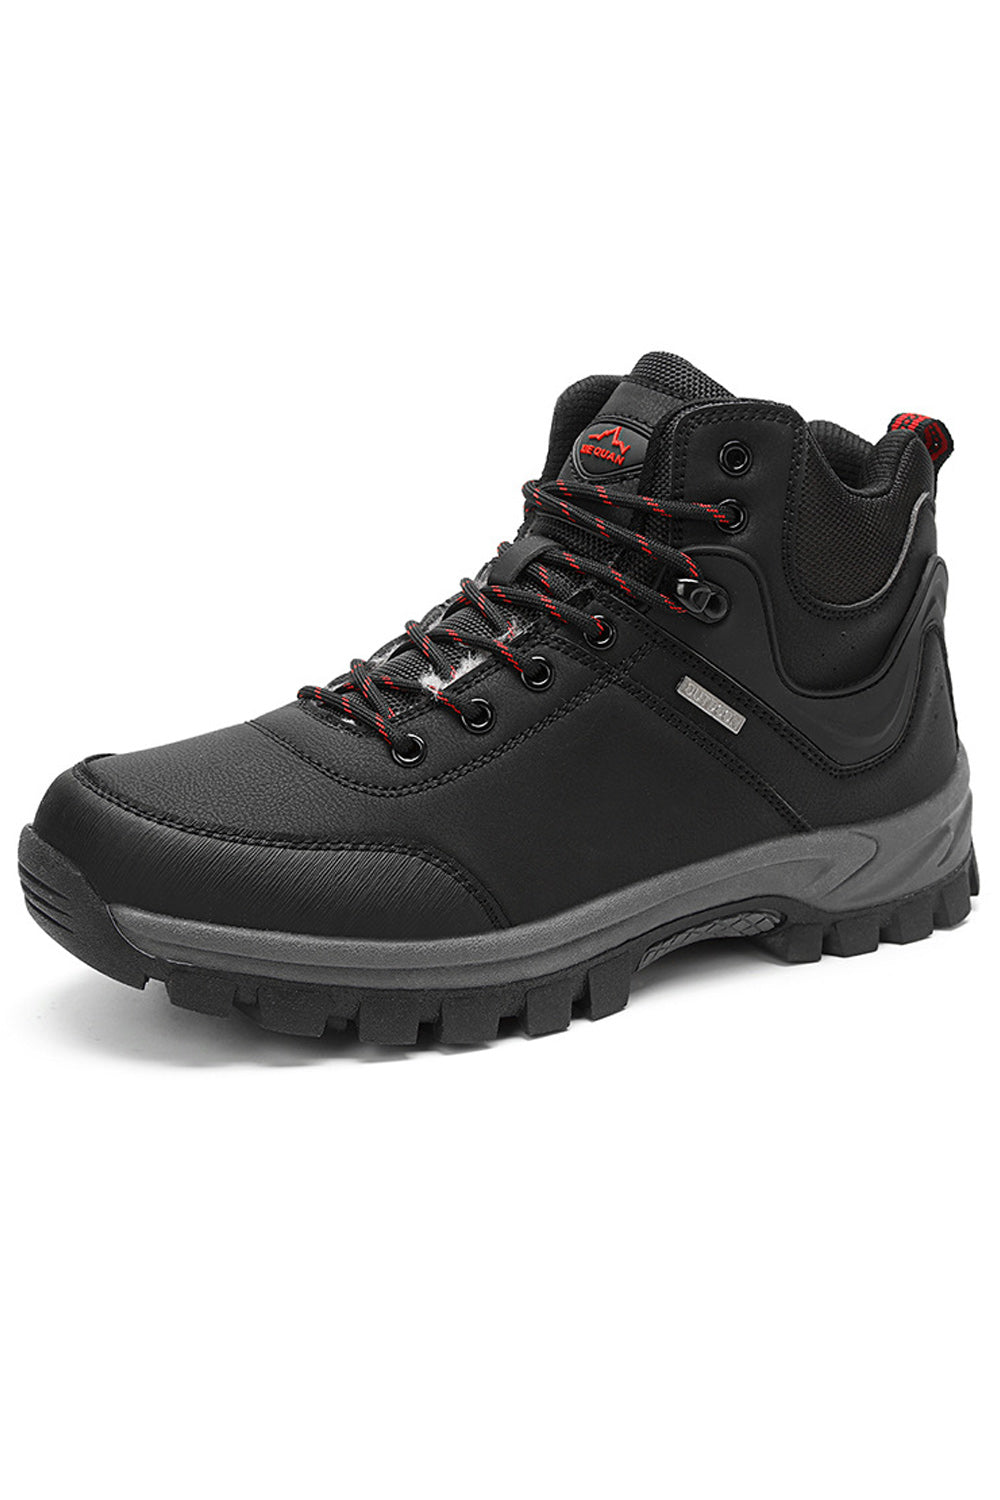 Men Round Toe Thick Soled Solid Pattern High Top Mountaining Cotton Hiking Boots - MSFHB95064